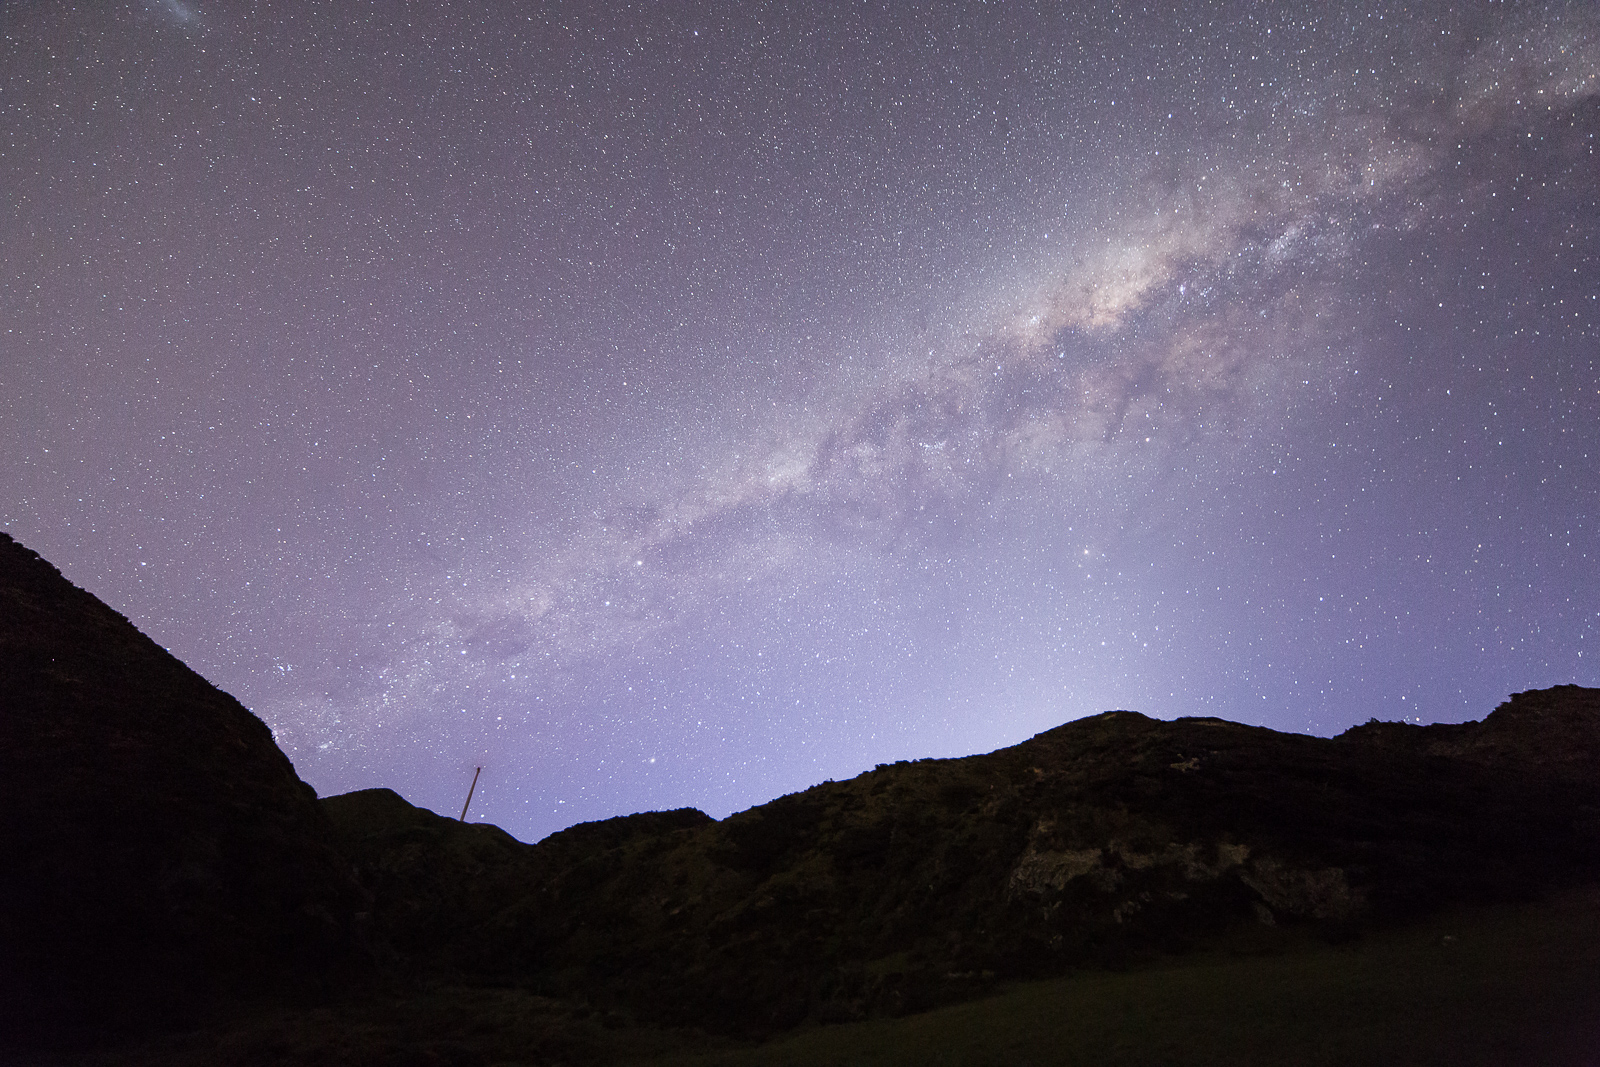 The milky way over the Makara hills